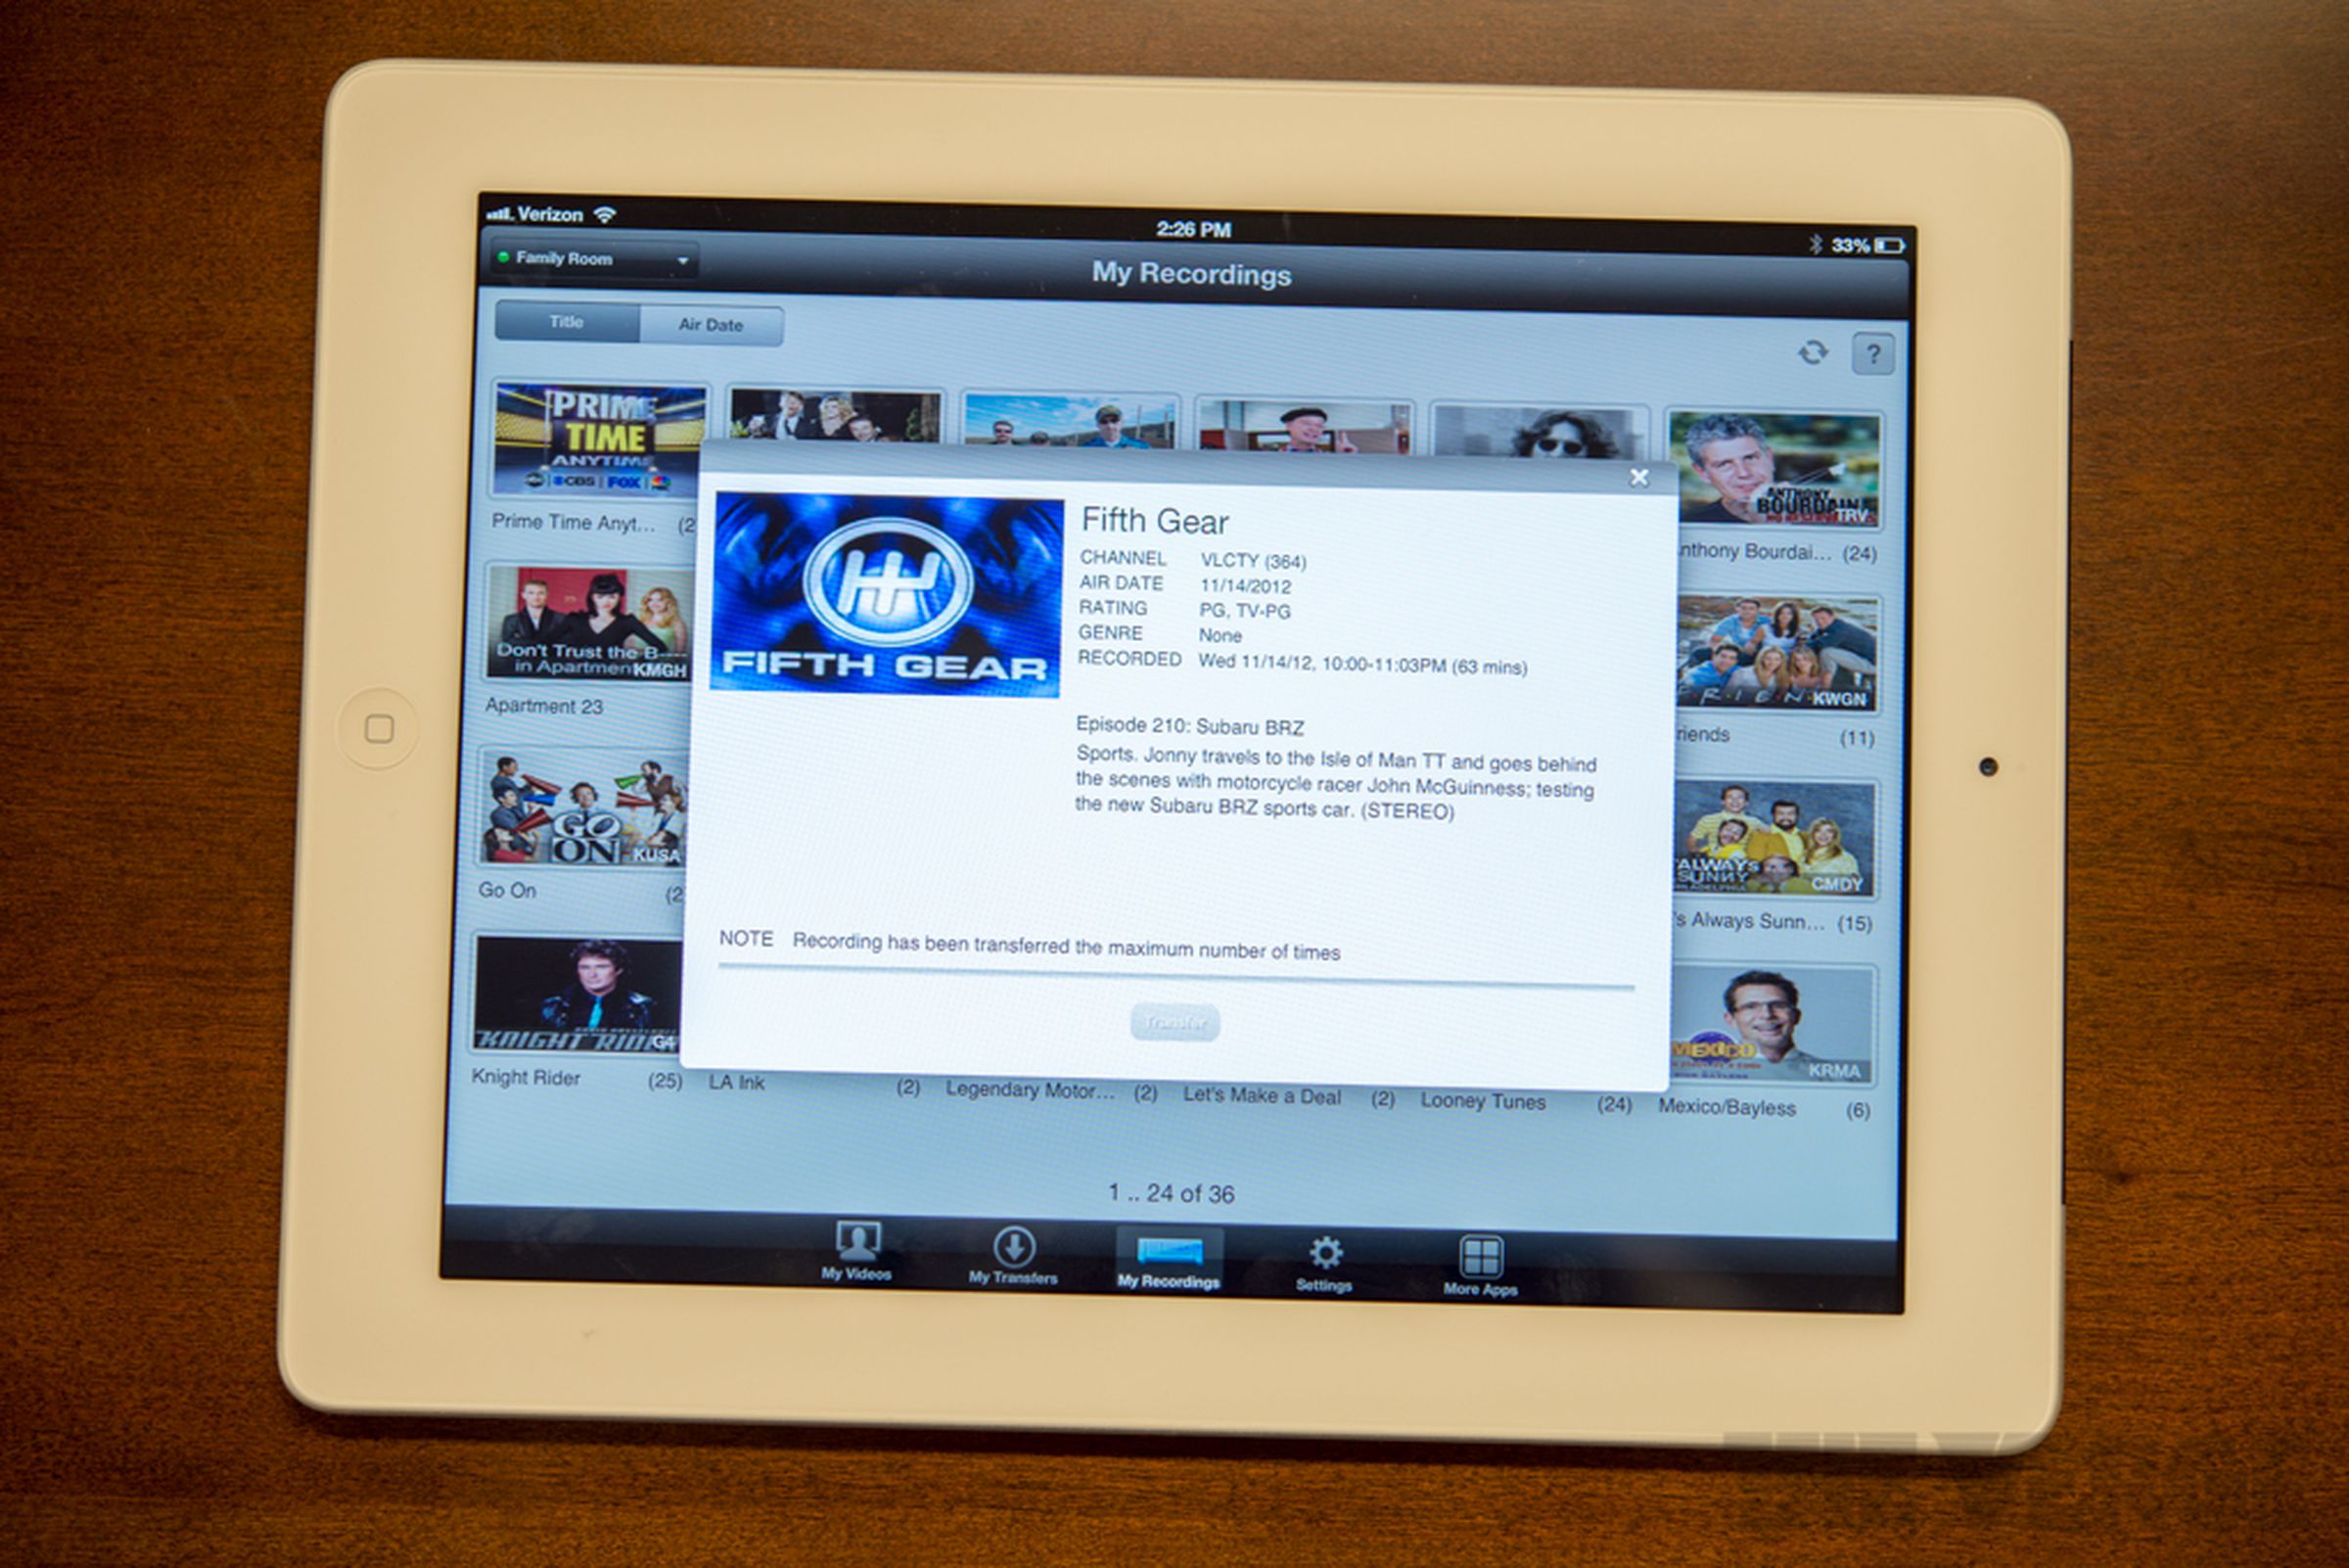 Dish Hopper with Sling and Dish Anywhere app hands-on pictures